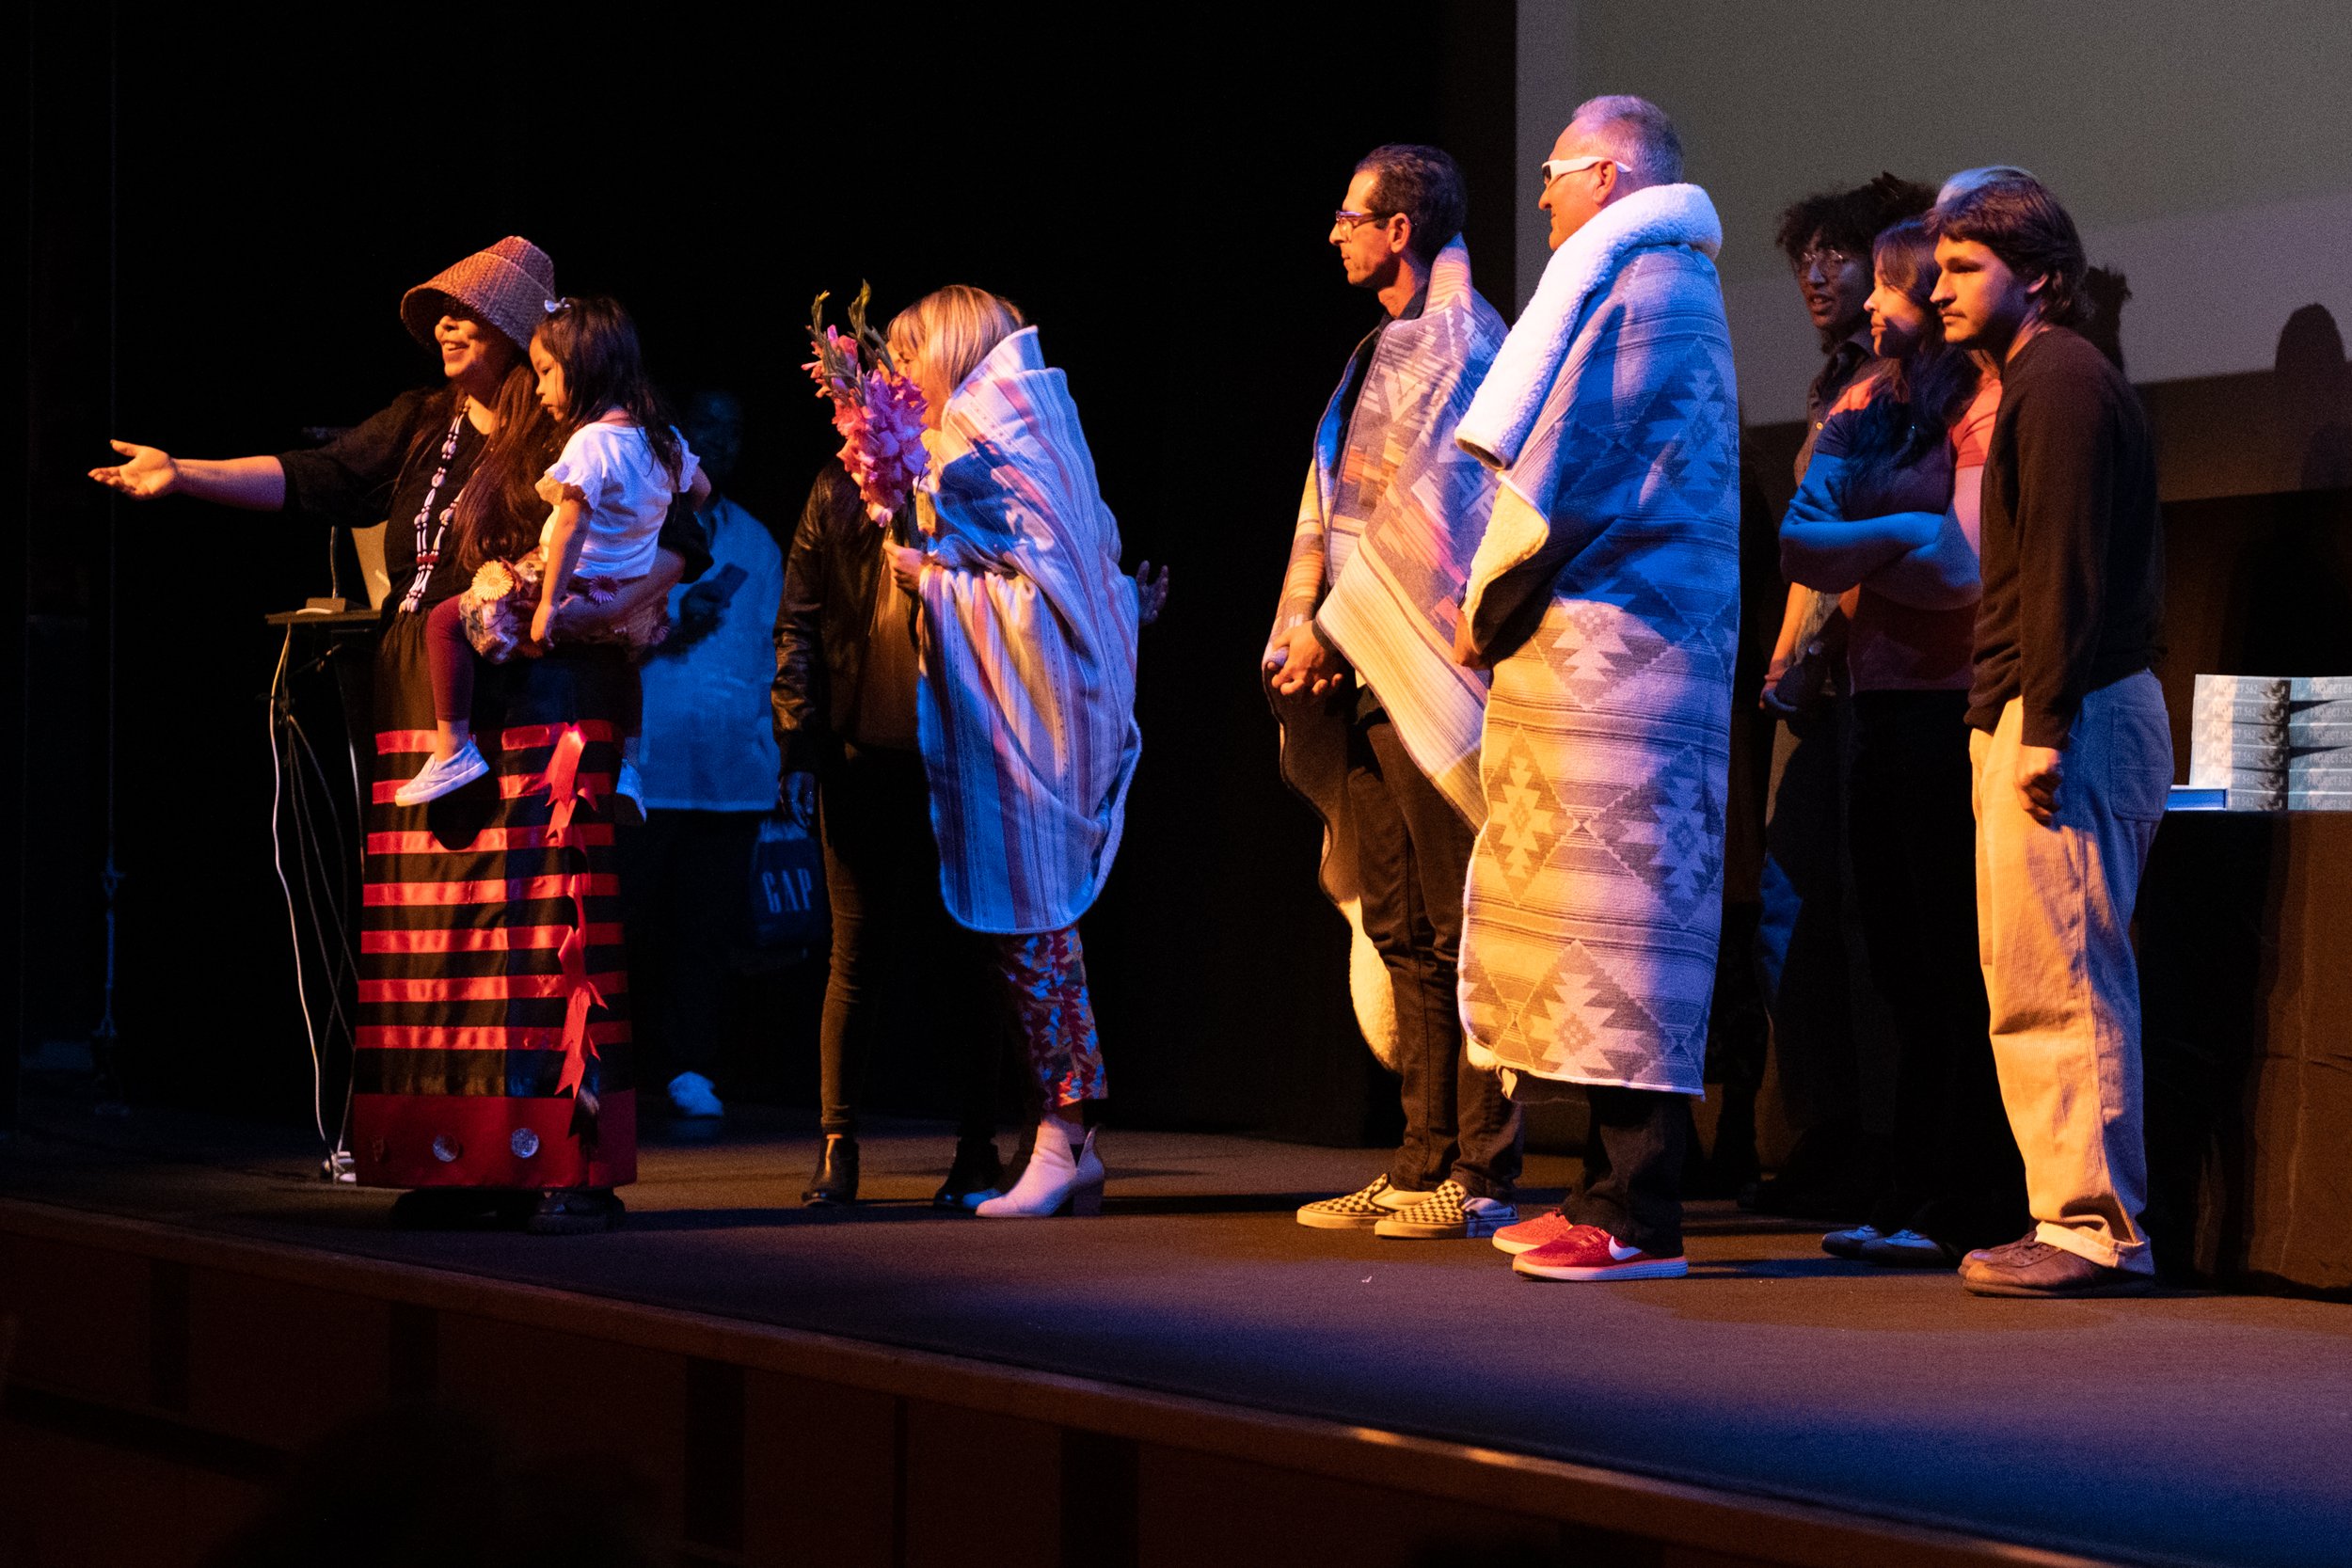  On Monday May 8th, 2023, Matika Wilbur, author of "Project 562, Changing The Way We See Native America", at the BroadStage Theater in Santa Monica, Calif., presents gifts of blankets to the faculty instrumental in making her experience at Santa Moni